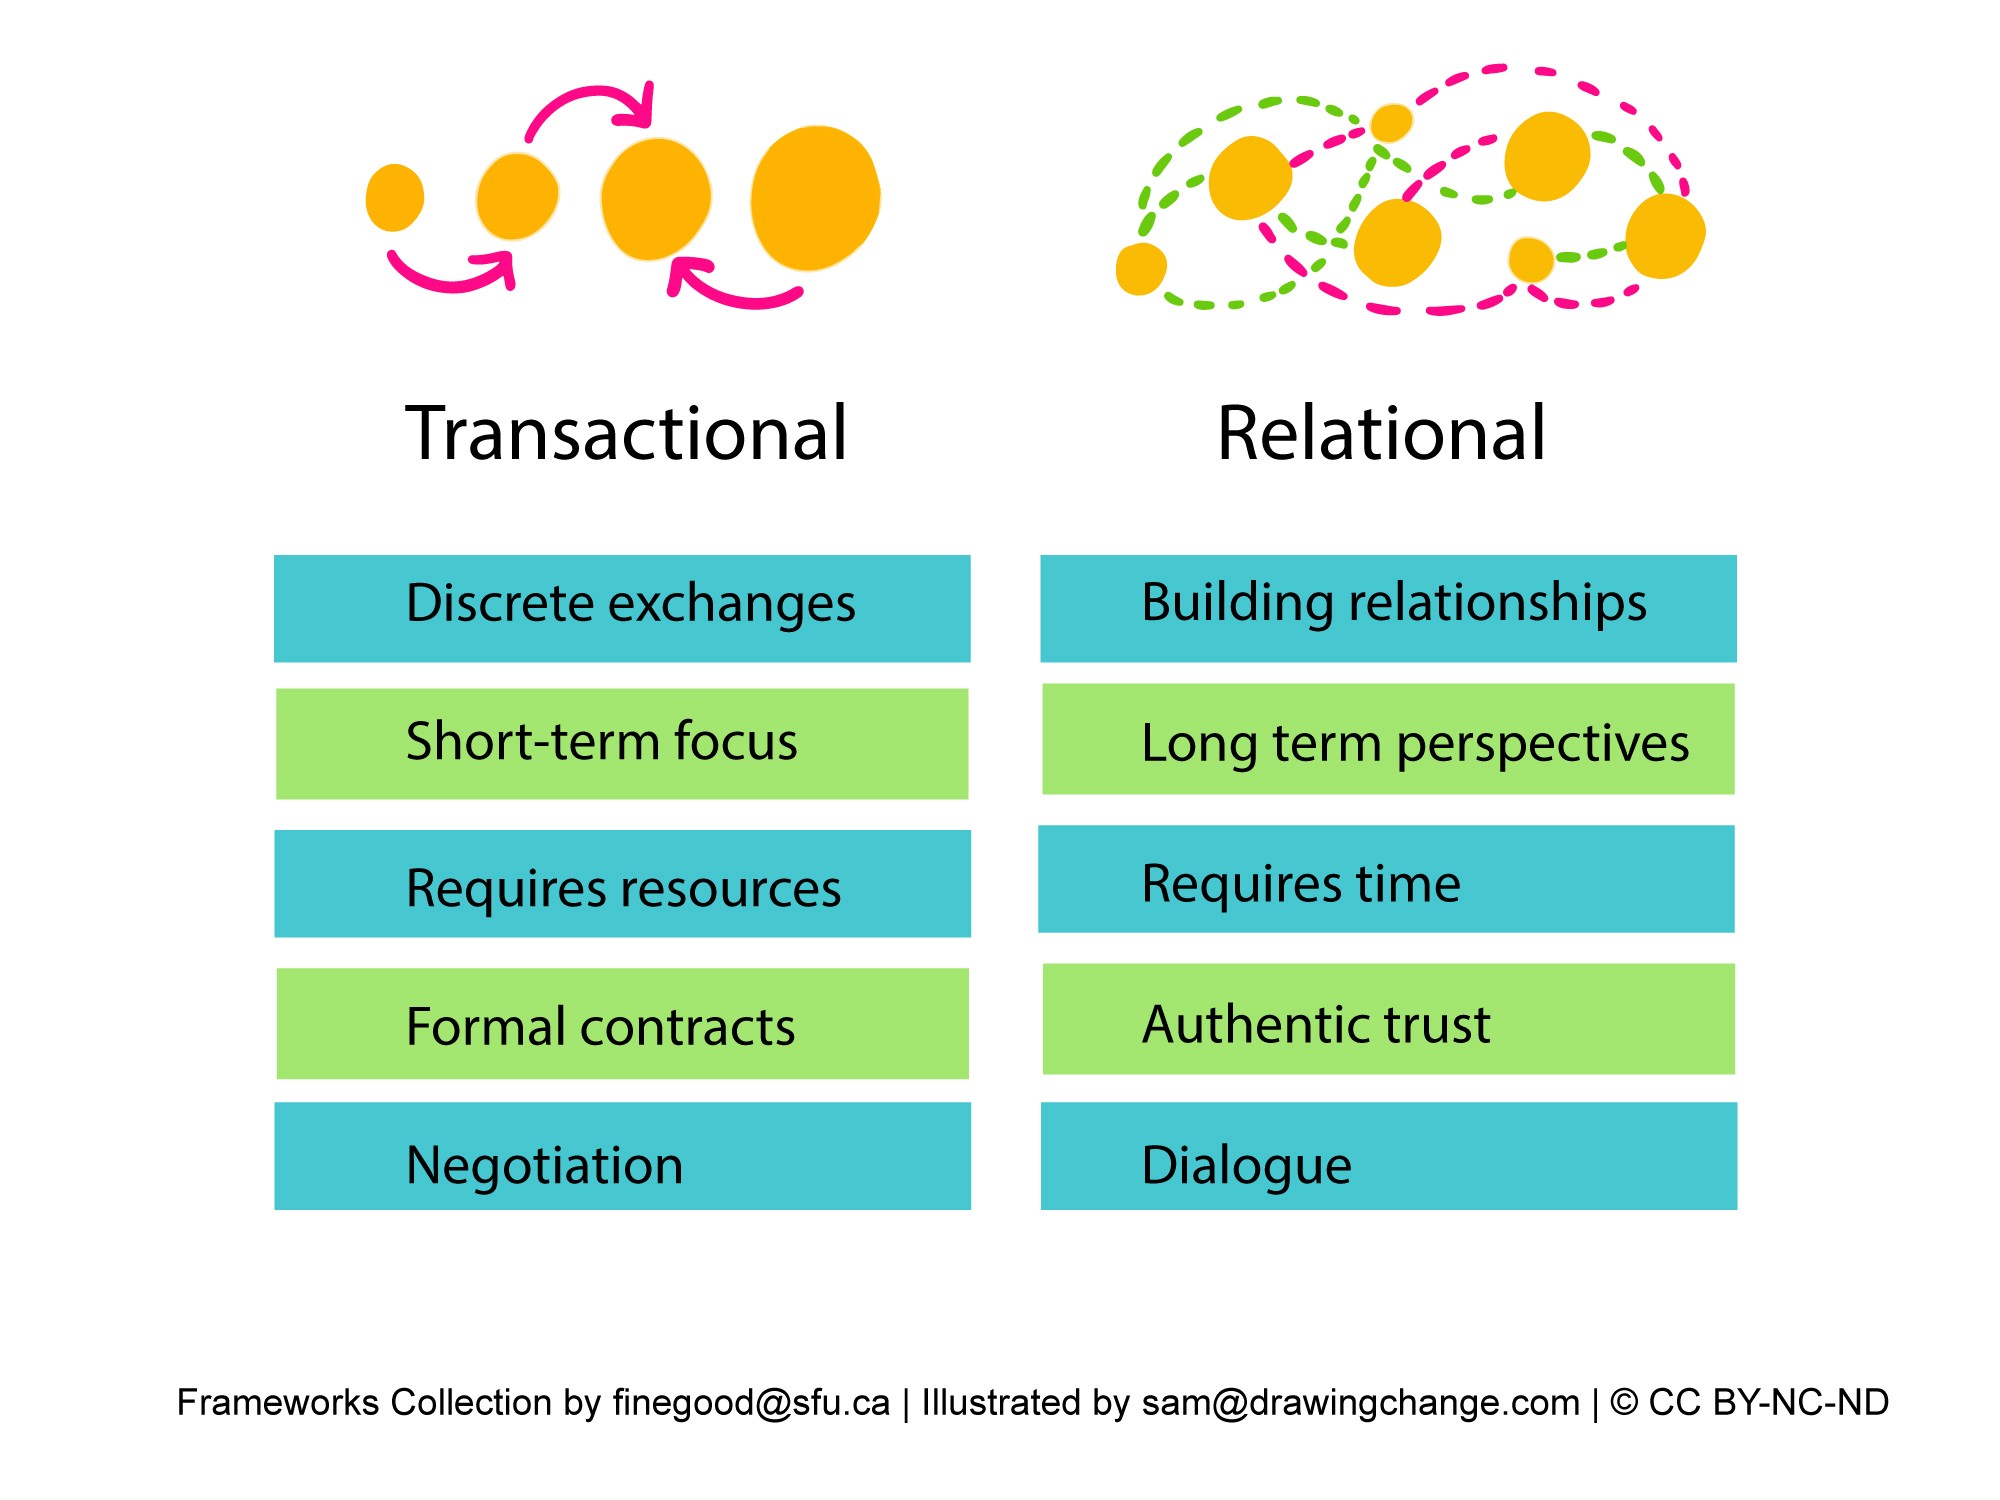 The image displays a two-column table that contrasts "Transactional" with "Relational" concepts, each column accompanied by an abstract icon.  On the left, "Transactional" is written in bold, with an icon above it consisting of three circles connected by arrows, suggesting a cycle of transactions or exchanges.   On the right, "Relational" is similarly bolded, with an icon featuring circles connected by dashed lines, indicating a network or relationships.   Paired left to right are: Discrete exchanges to Building Relationships; Short-term focus to Long term perspective Requires resources to requires time Formal contracts to Authentic trust Negotiation to Dialogue  The bottom of the image includes the credits: "Frameworks Collection by finegood@sfu.ca | Illustrated by sam@drawingchange.com | © CC BY-NC-ND".